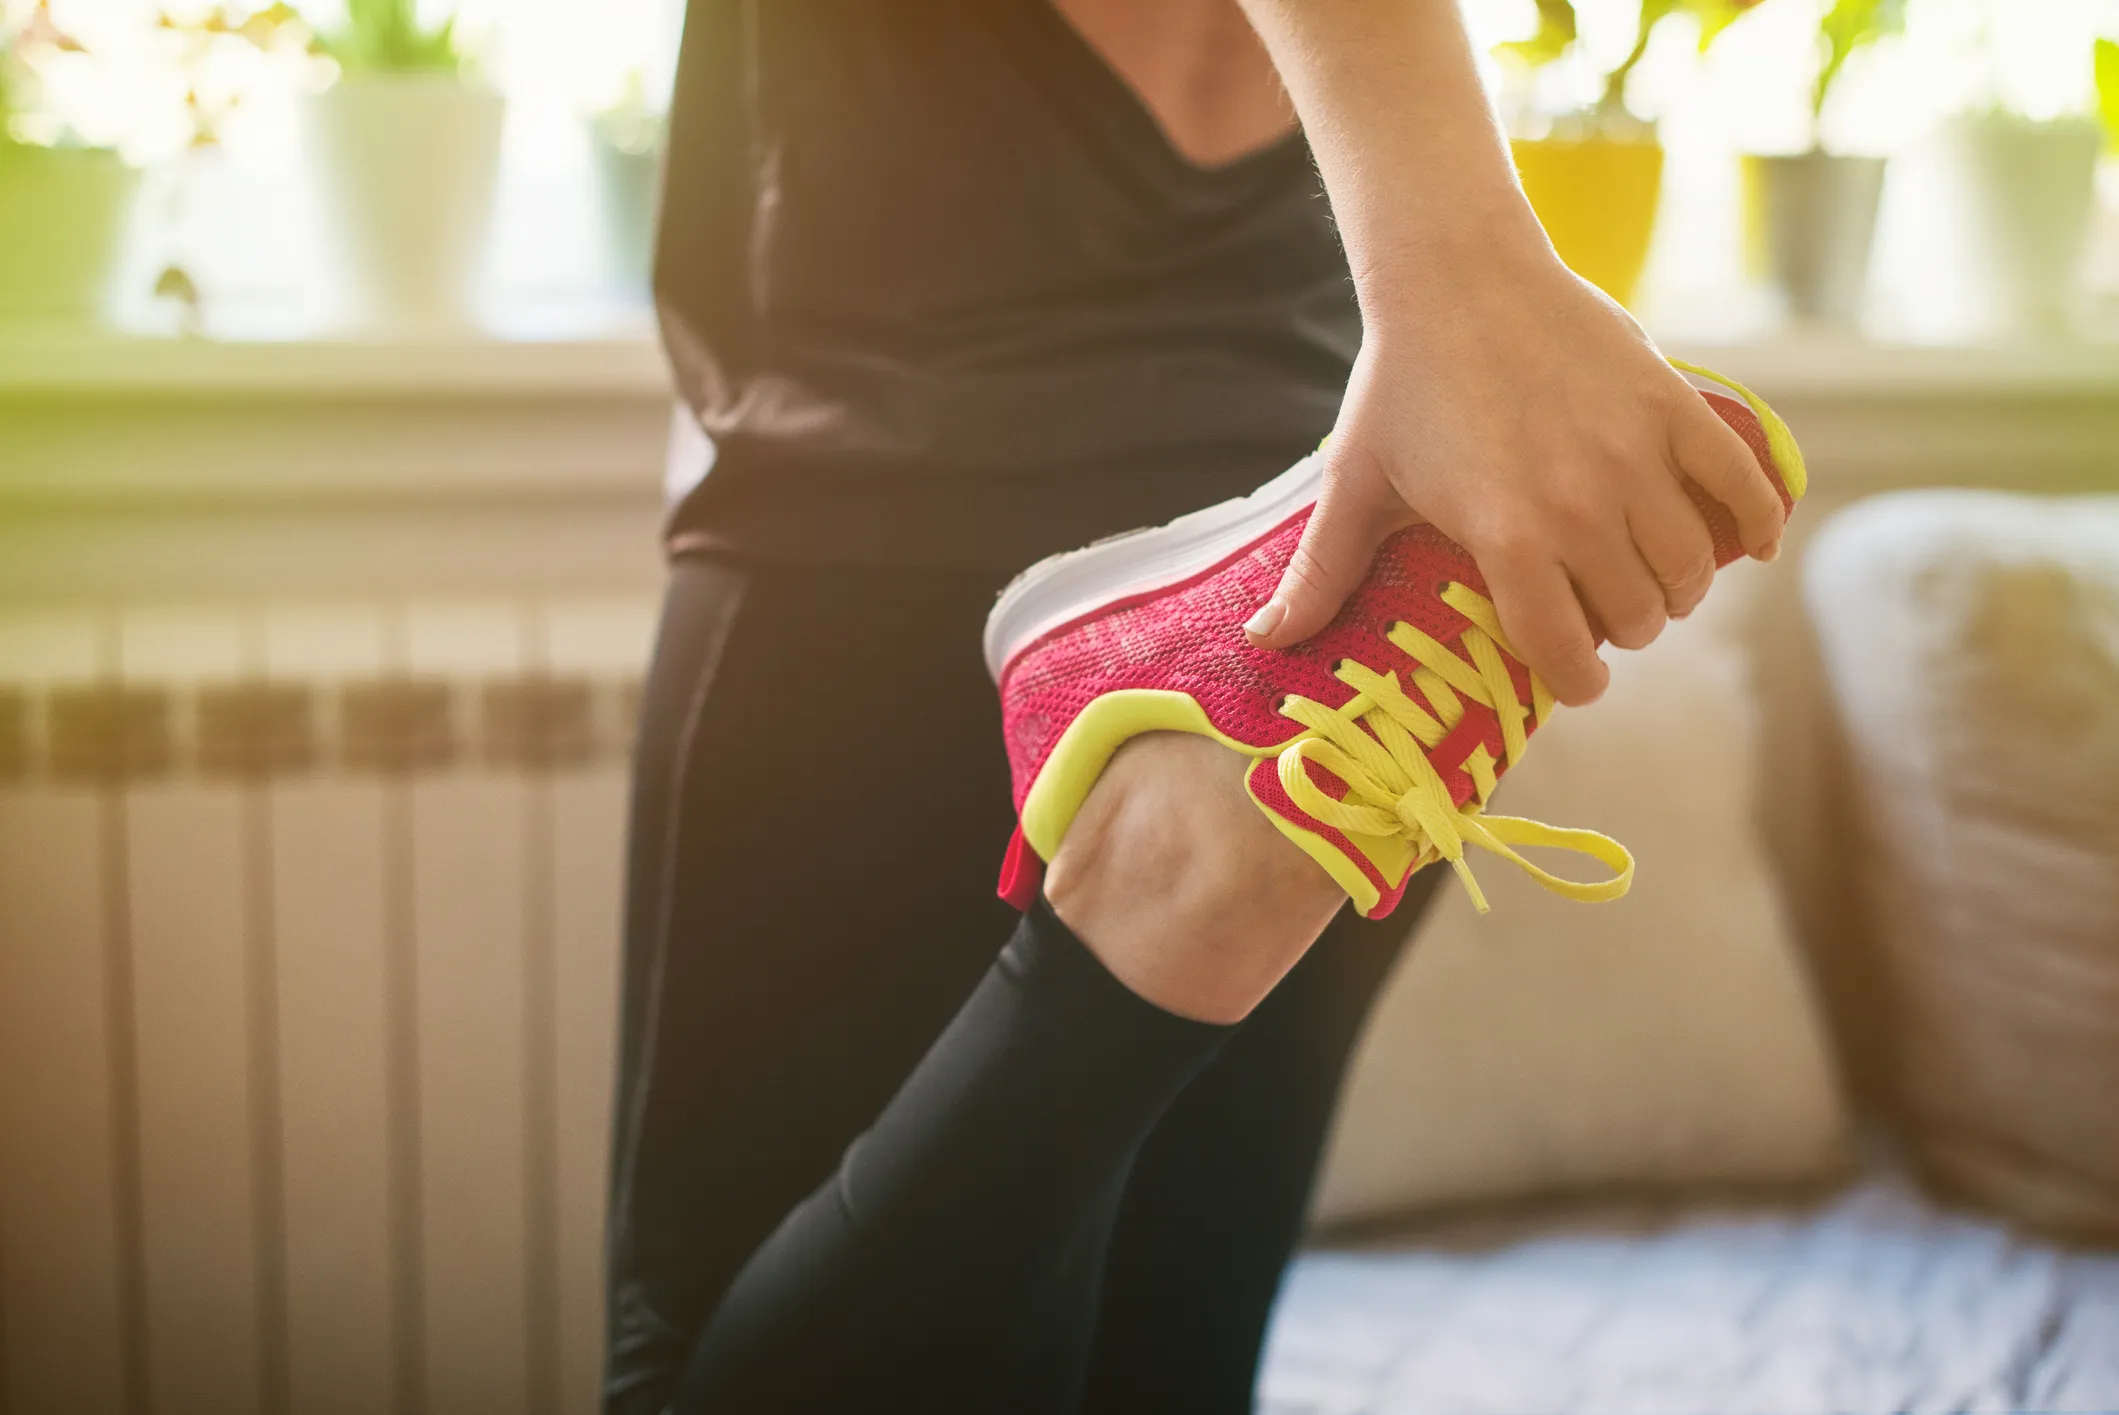 6 Steps to Become a Morning Exerciser